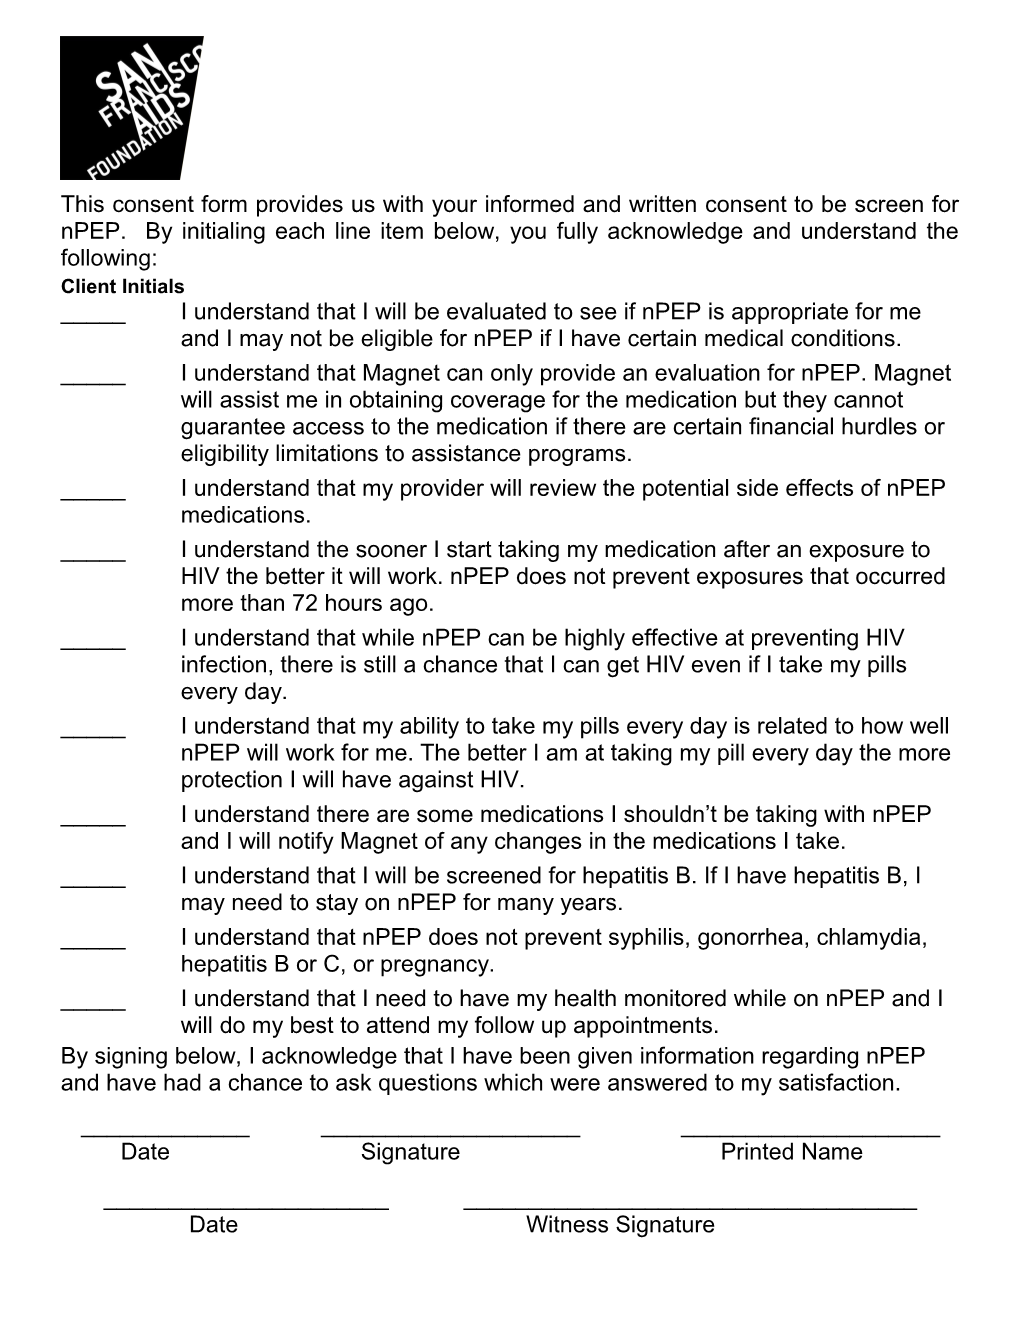 This Consent Form Provides Us with Your Informed and Written Consent to Be Screen for Npep